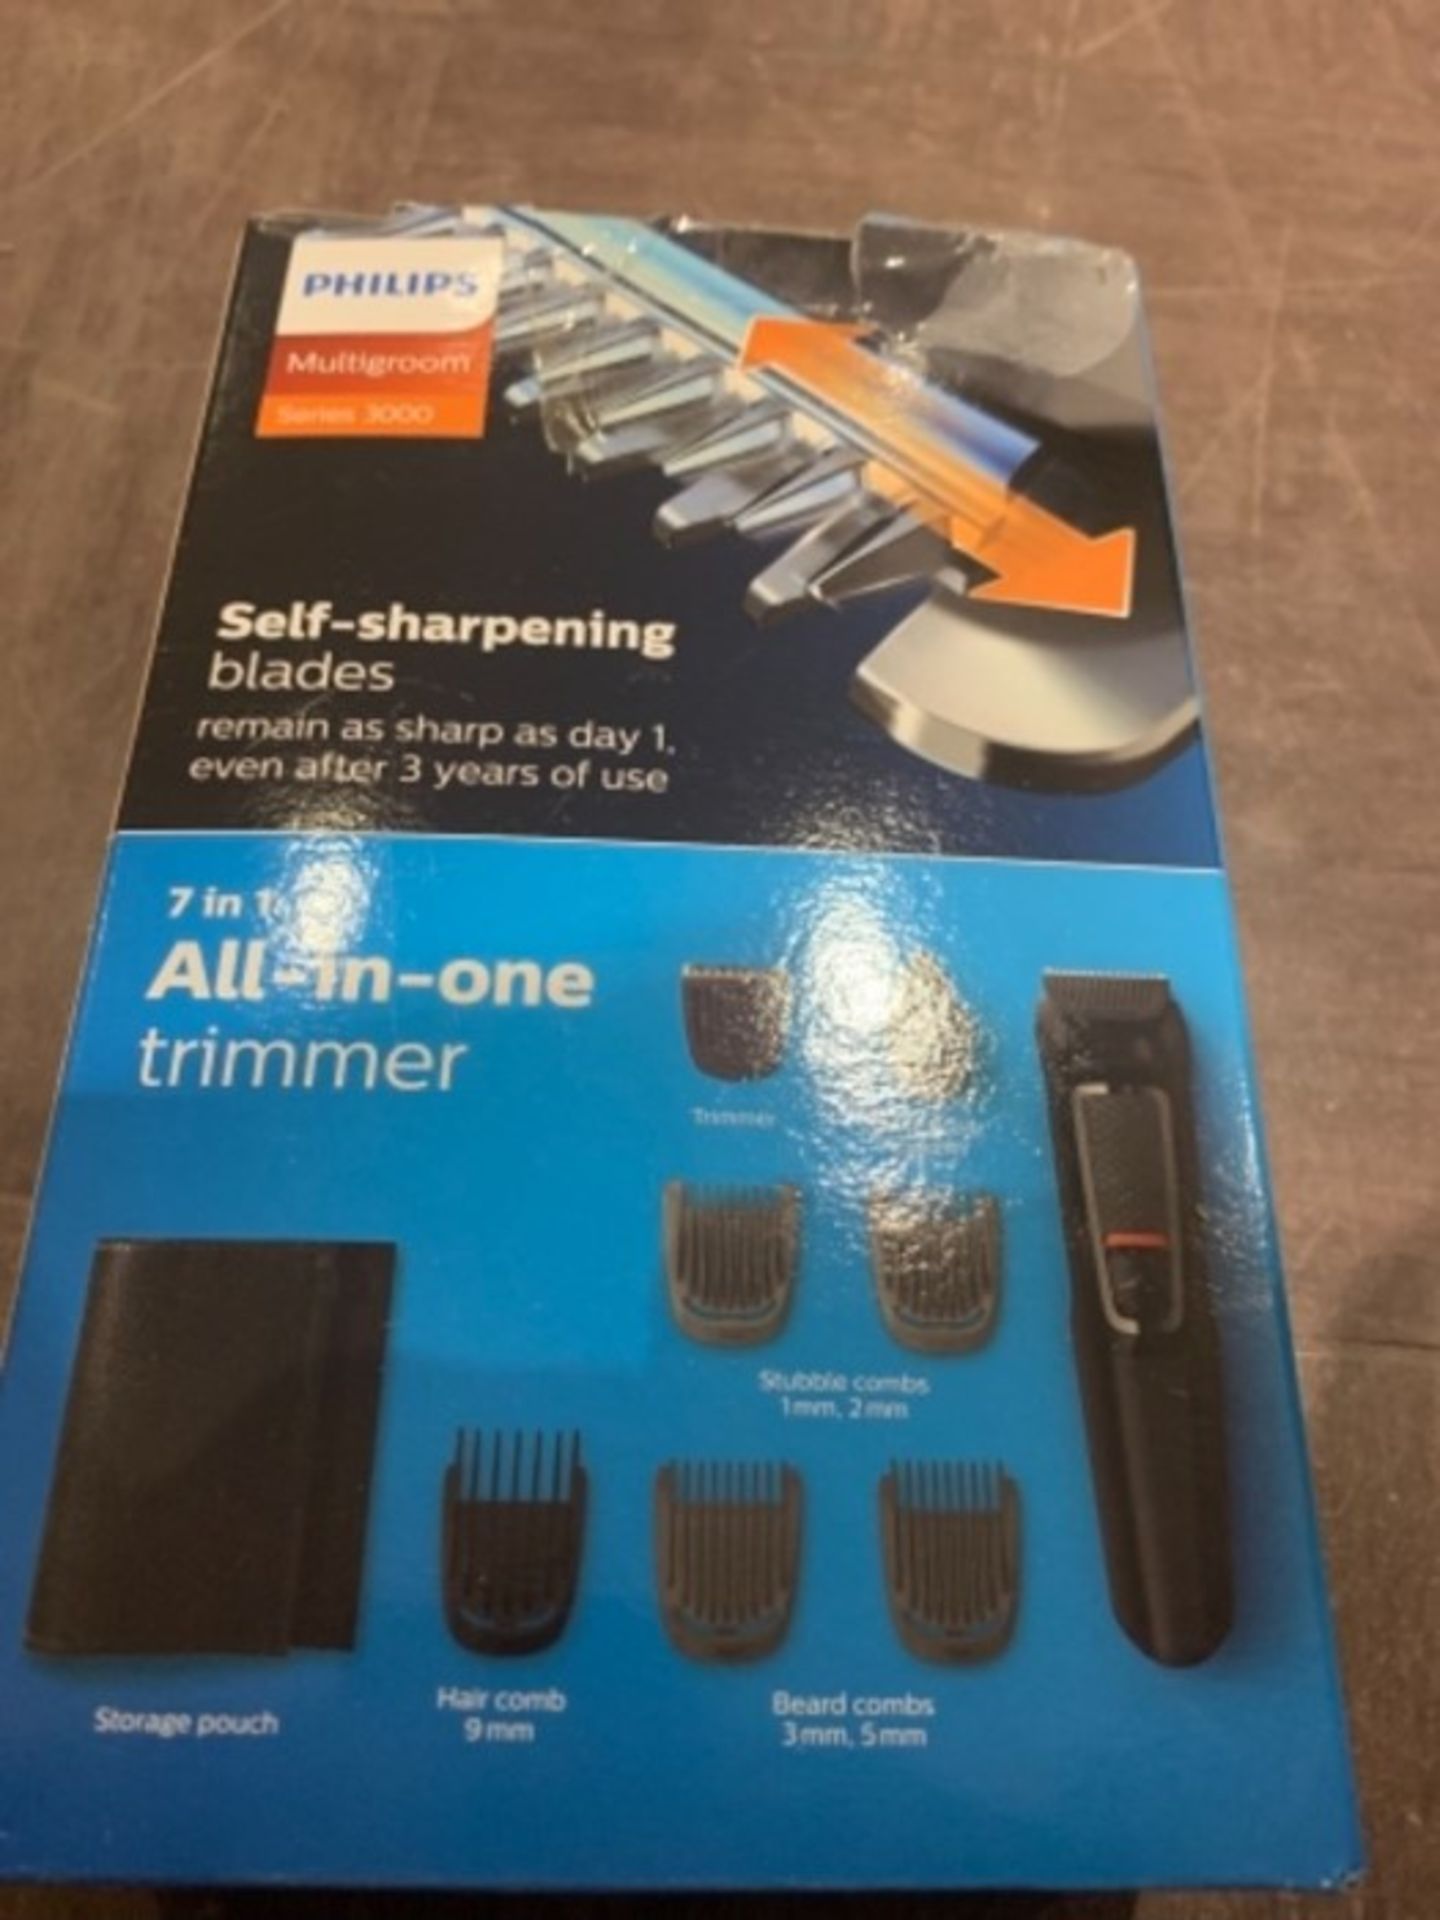 Philips 7-in-1 All-In-One Trimmer, Series 3000 Grooming Kit, Beard Trimmer and Hair Cl - Image 2 of 3